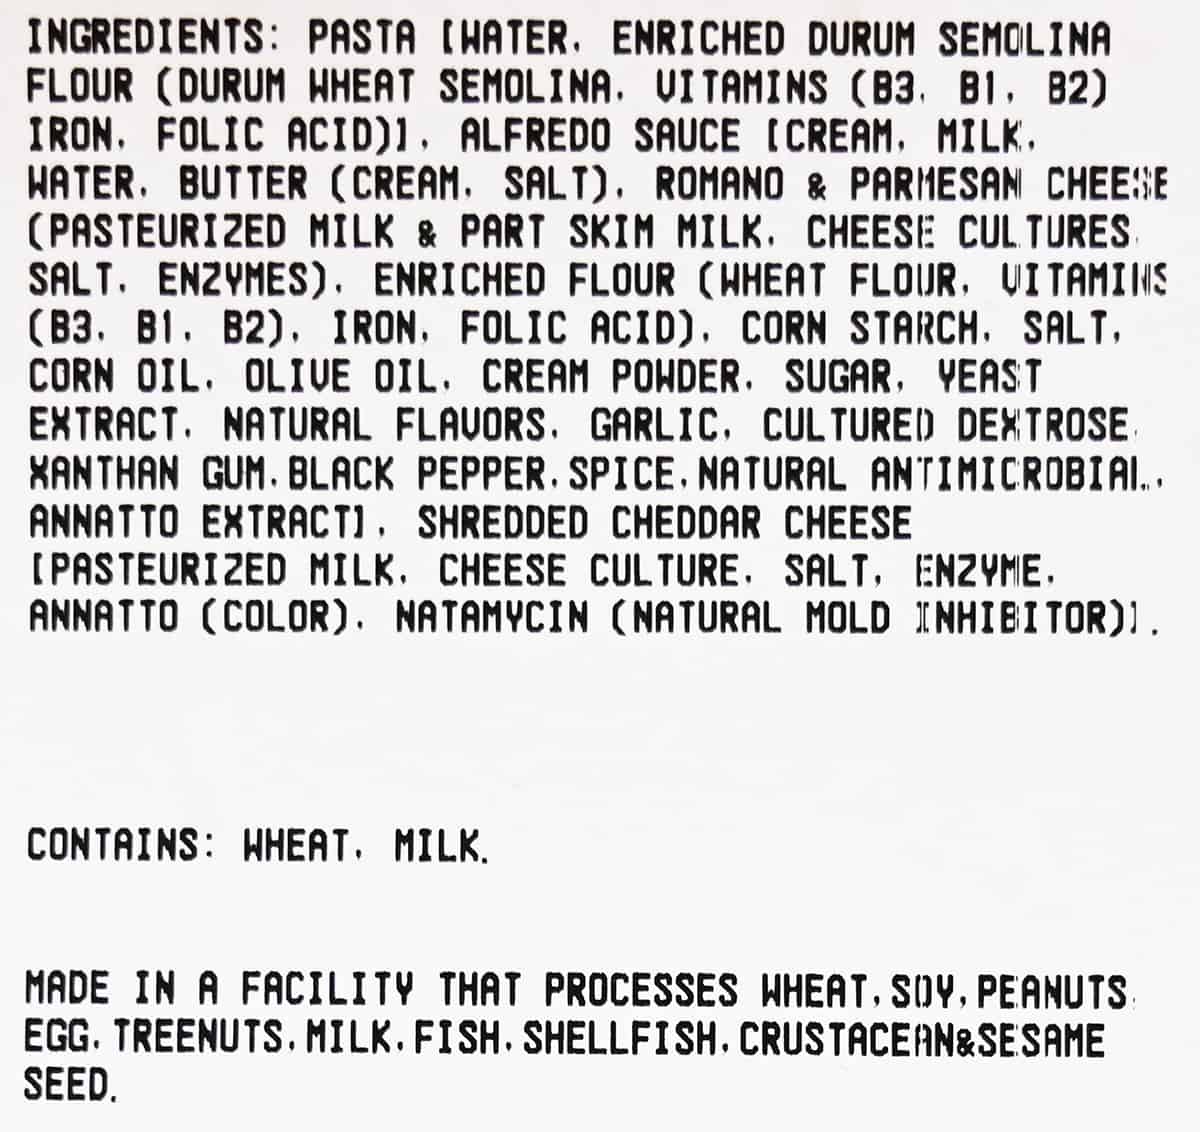 Image of the Costco Mac and Cheese ingredients list from the package.